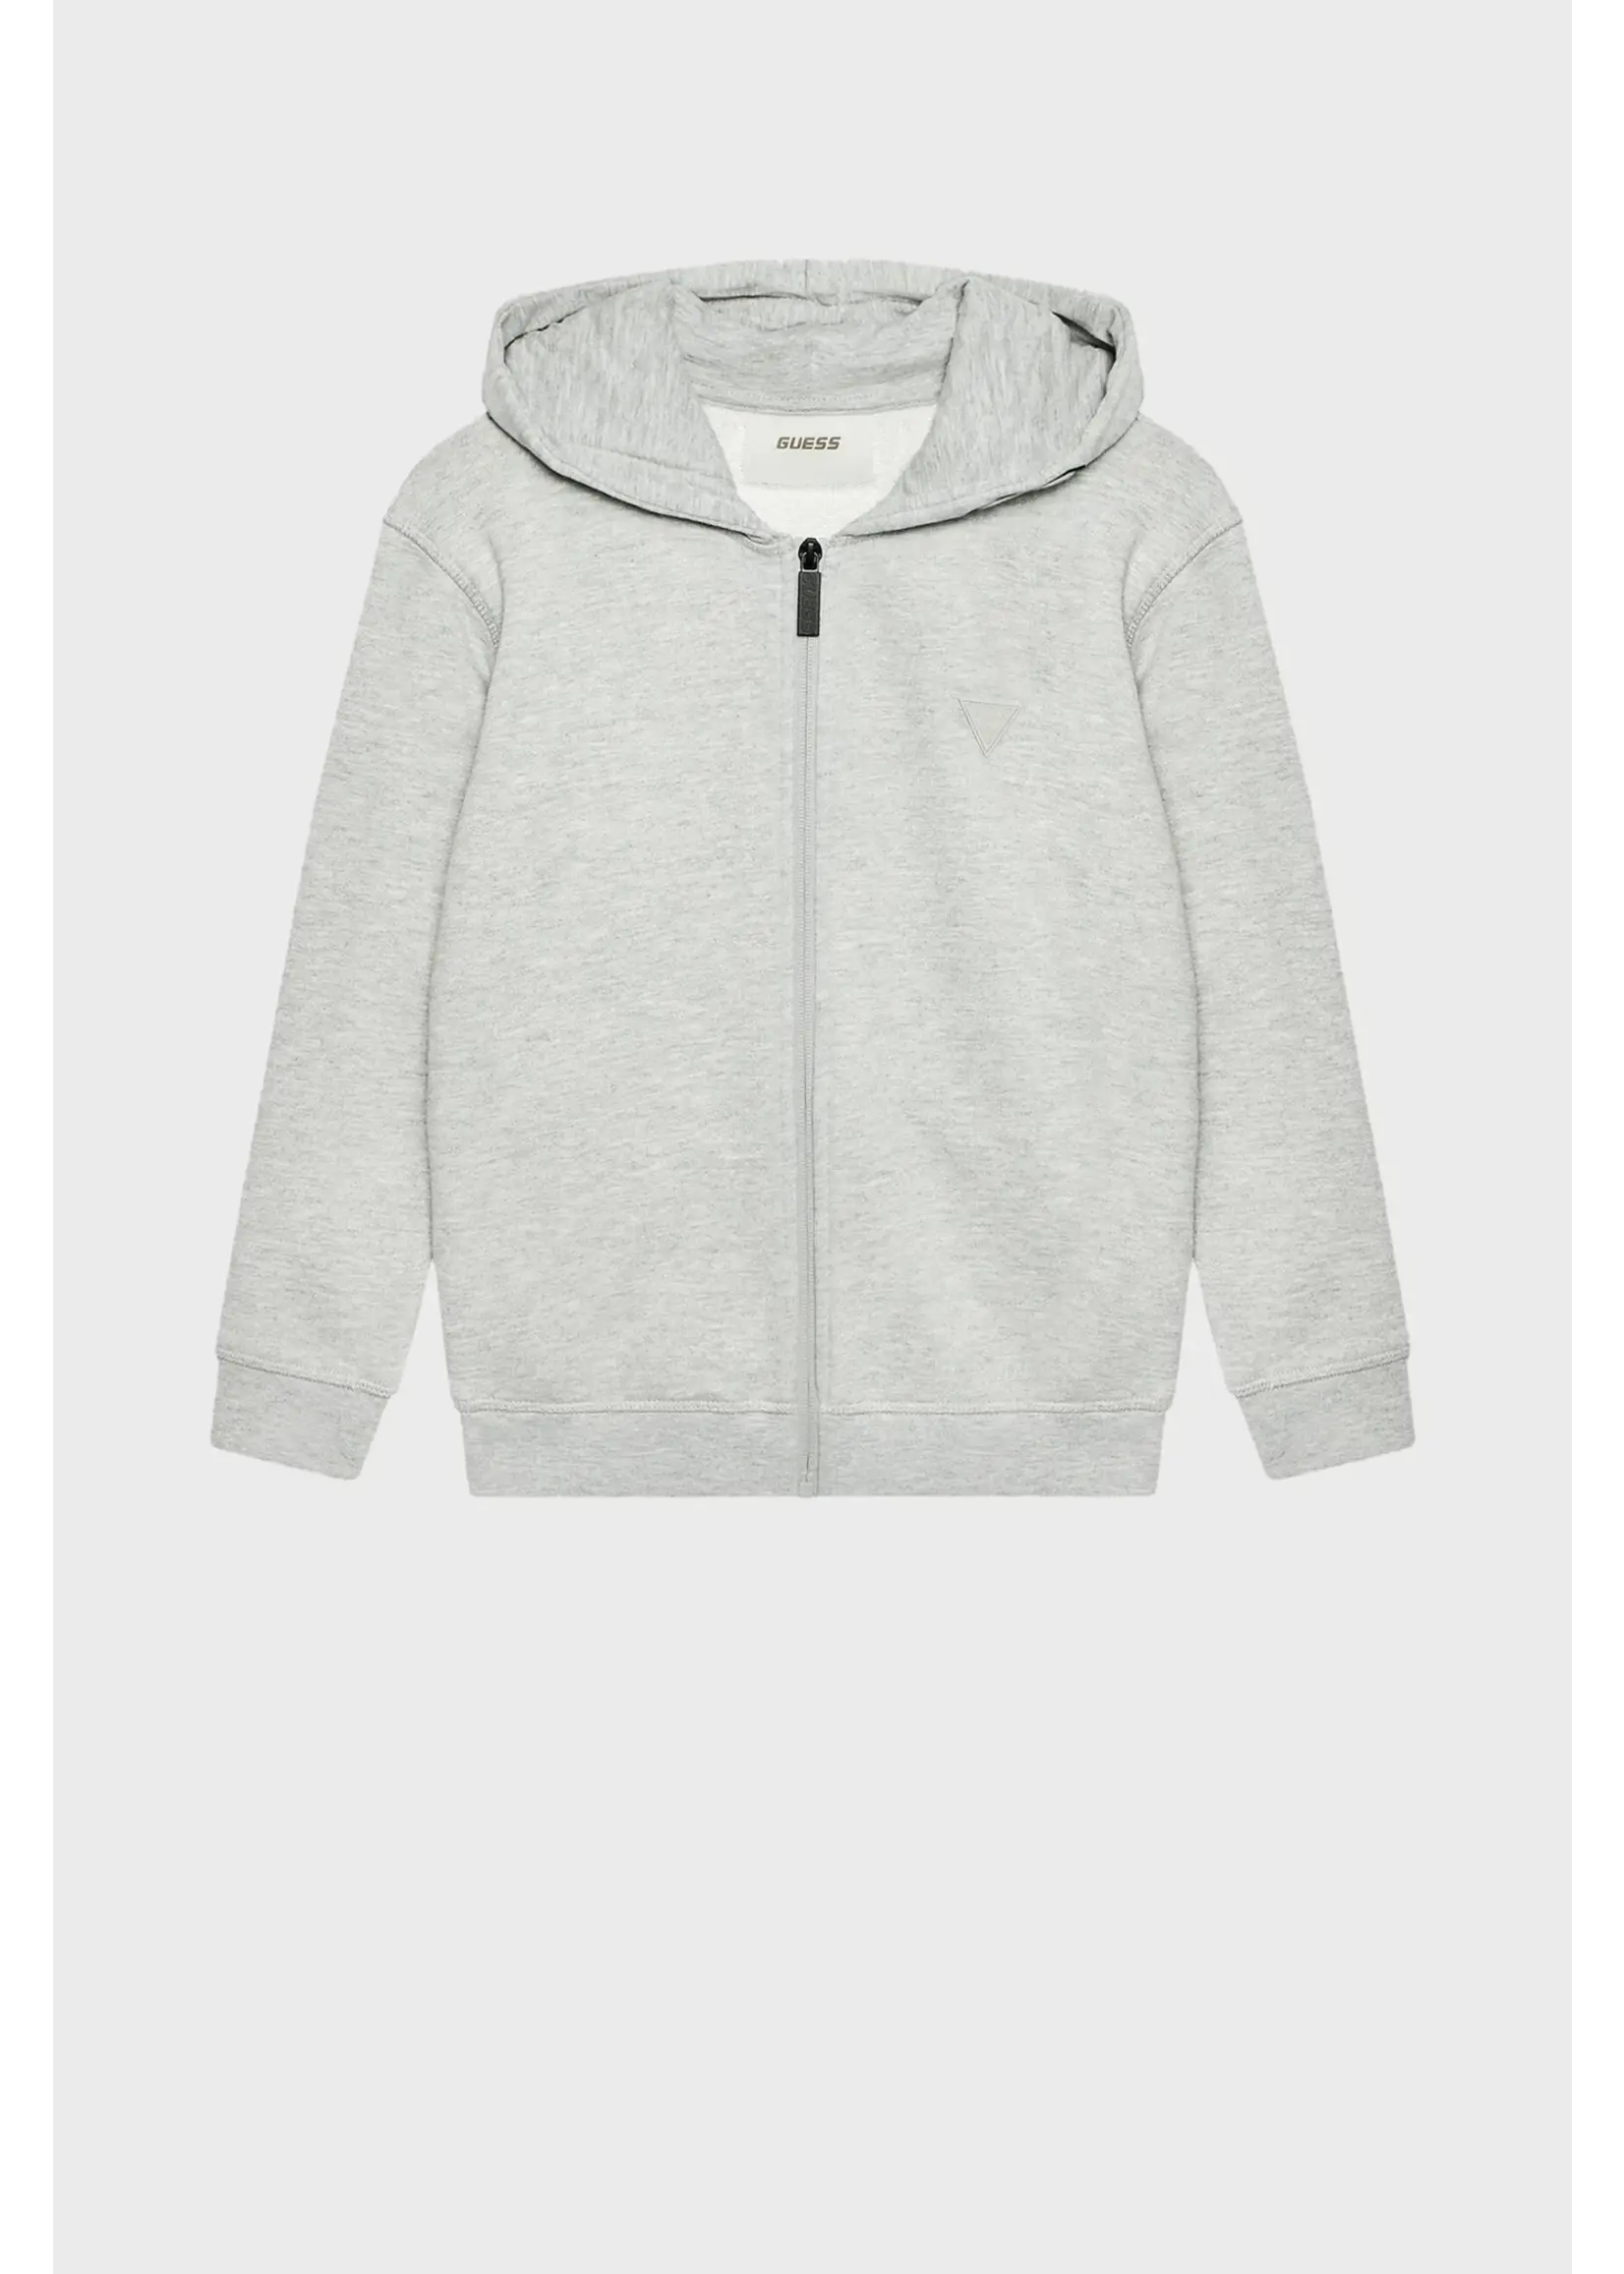 Guess L2YQ44 HOODED LS ACTIVE TOP W/ZIP LIGHT STONE HEATHER